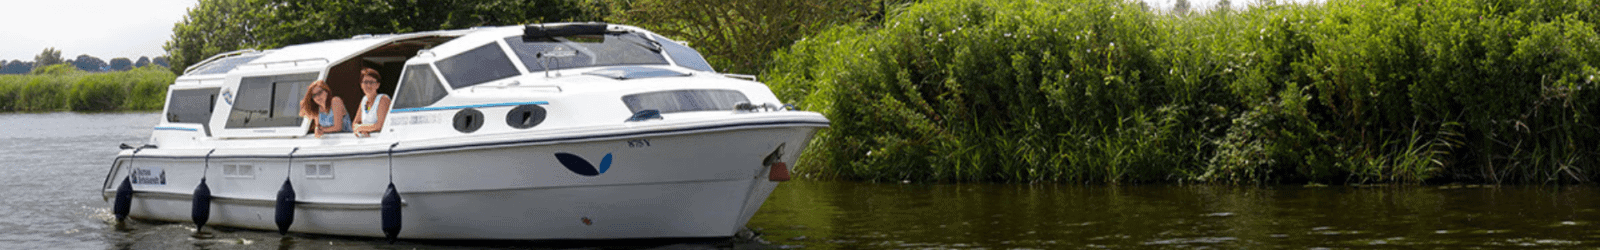 Last minute boating holidays on the Norfolk Broads